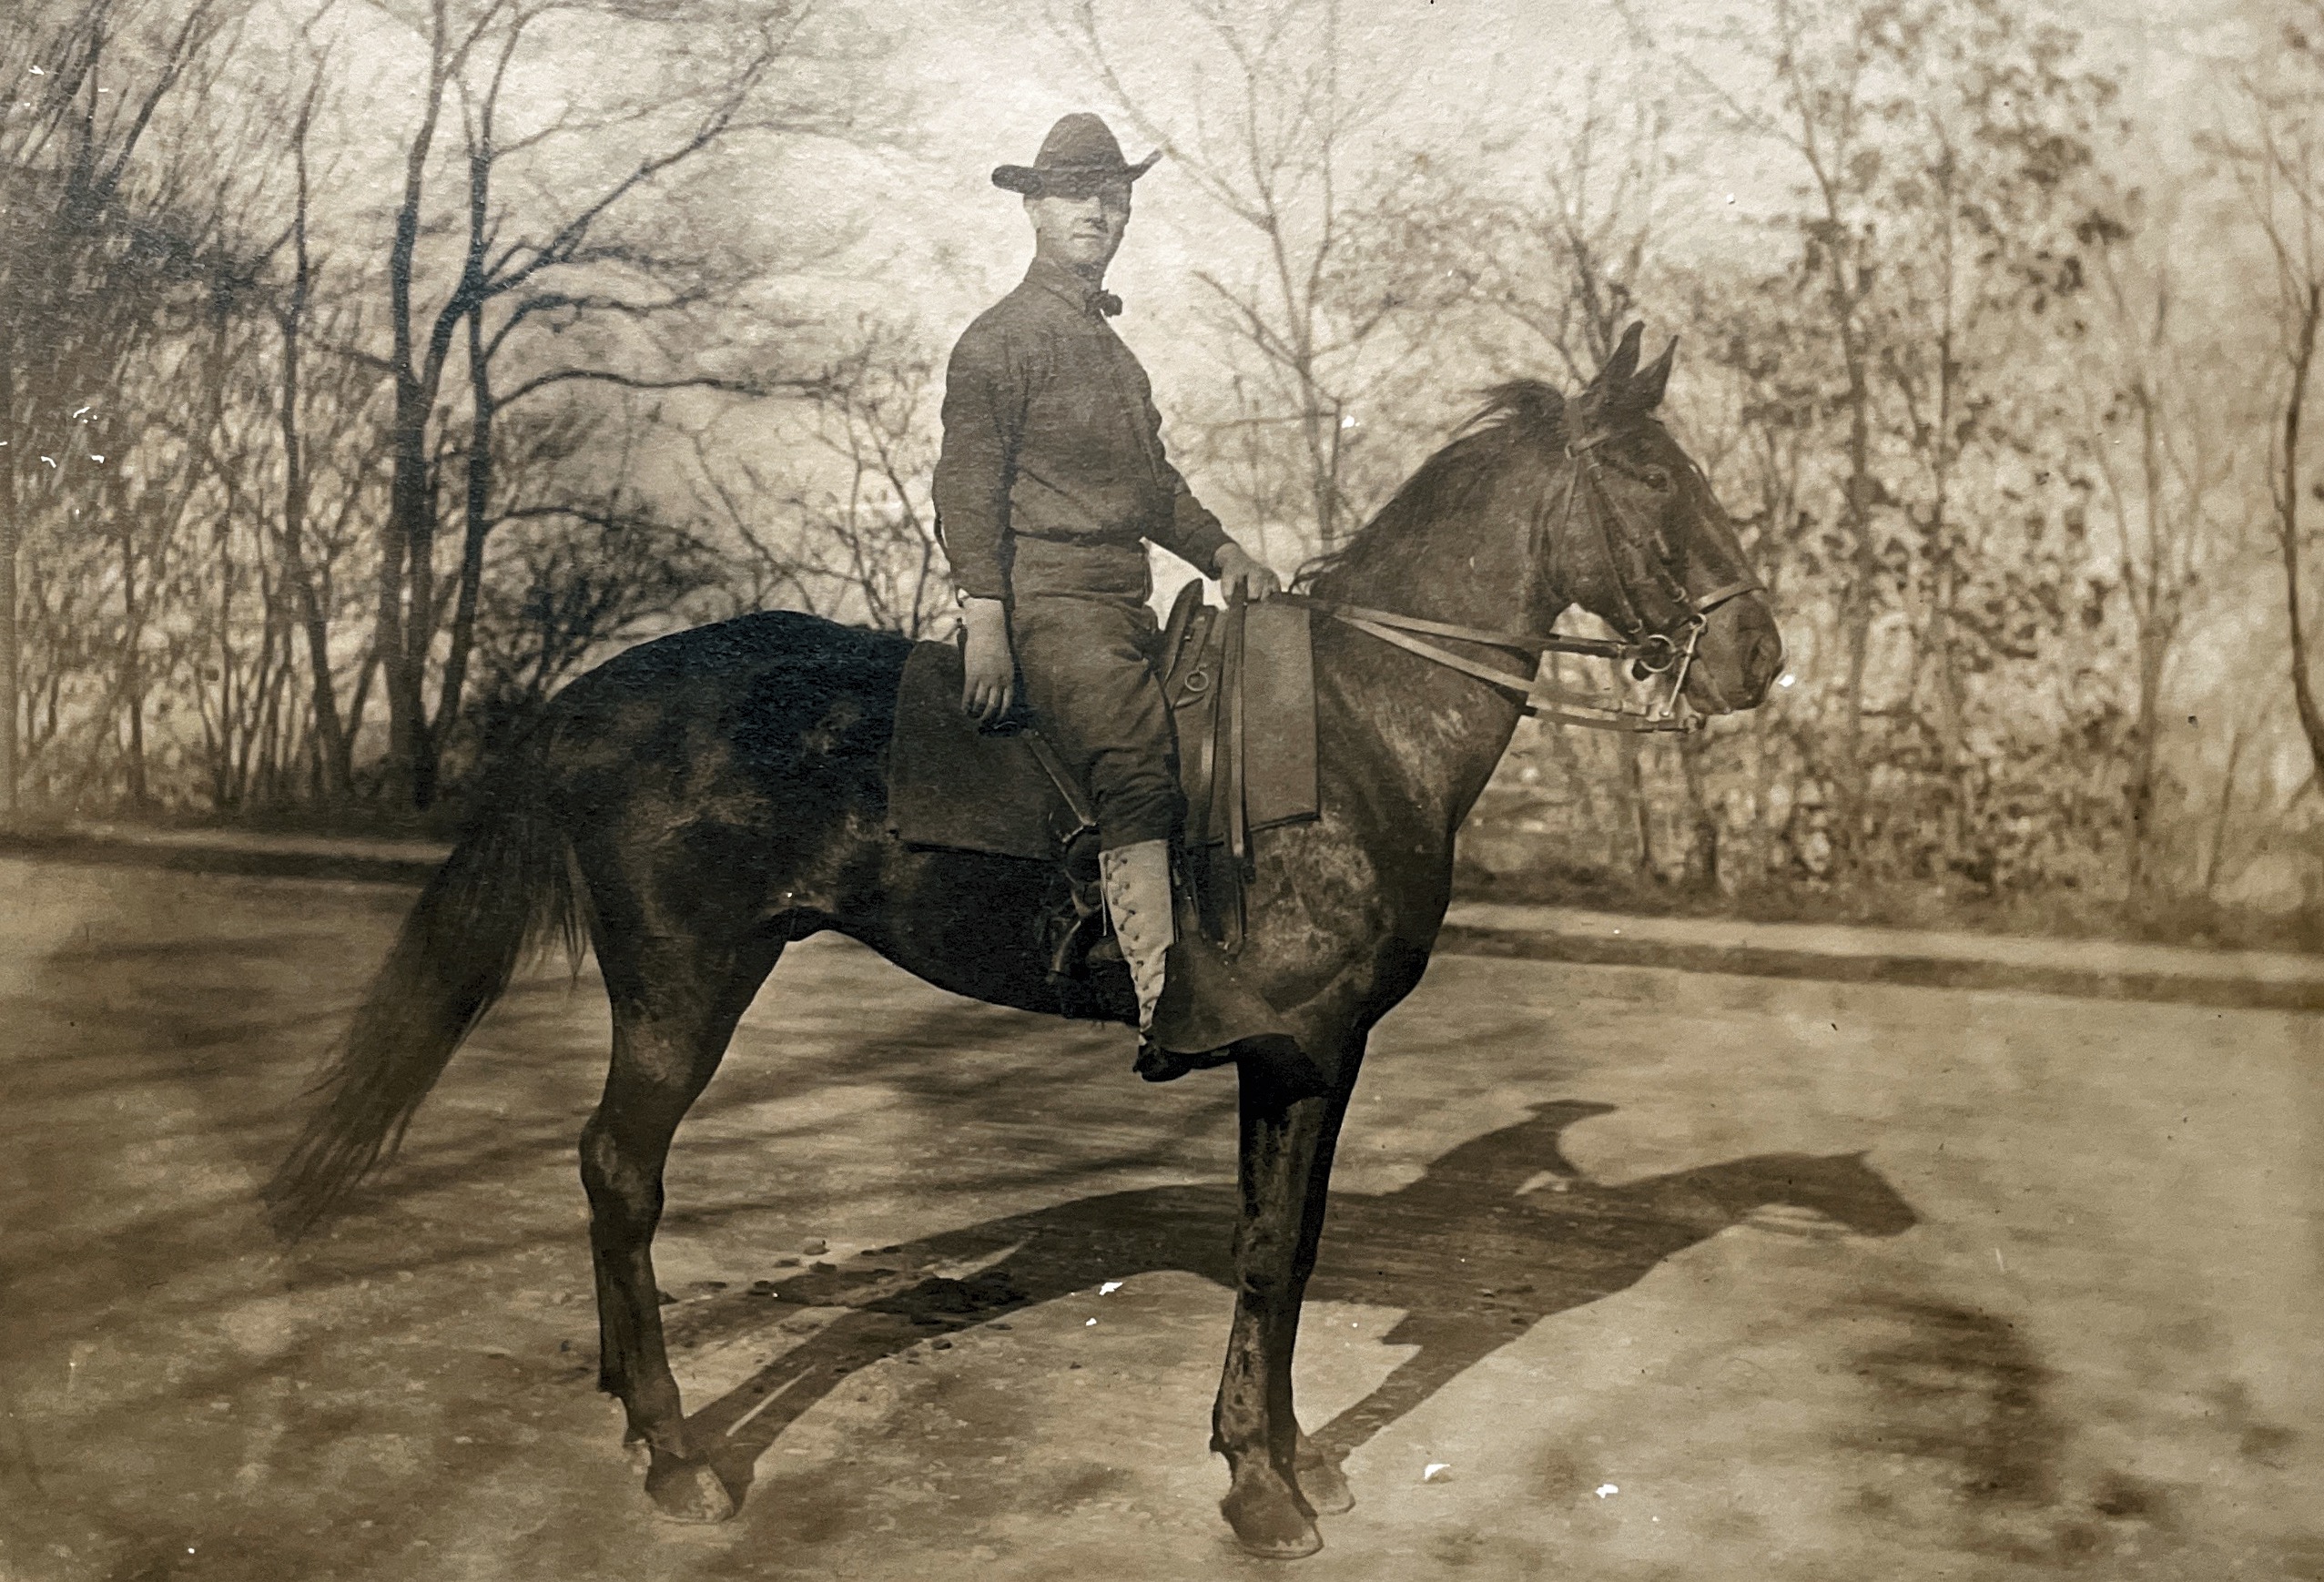 Grandpa Andrew Eckert in his Cavalry uniform at the beginning of the 20th century. Approximately 1910-1920